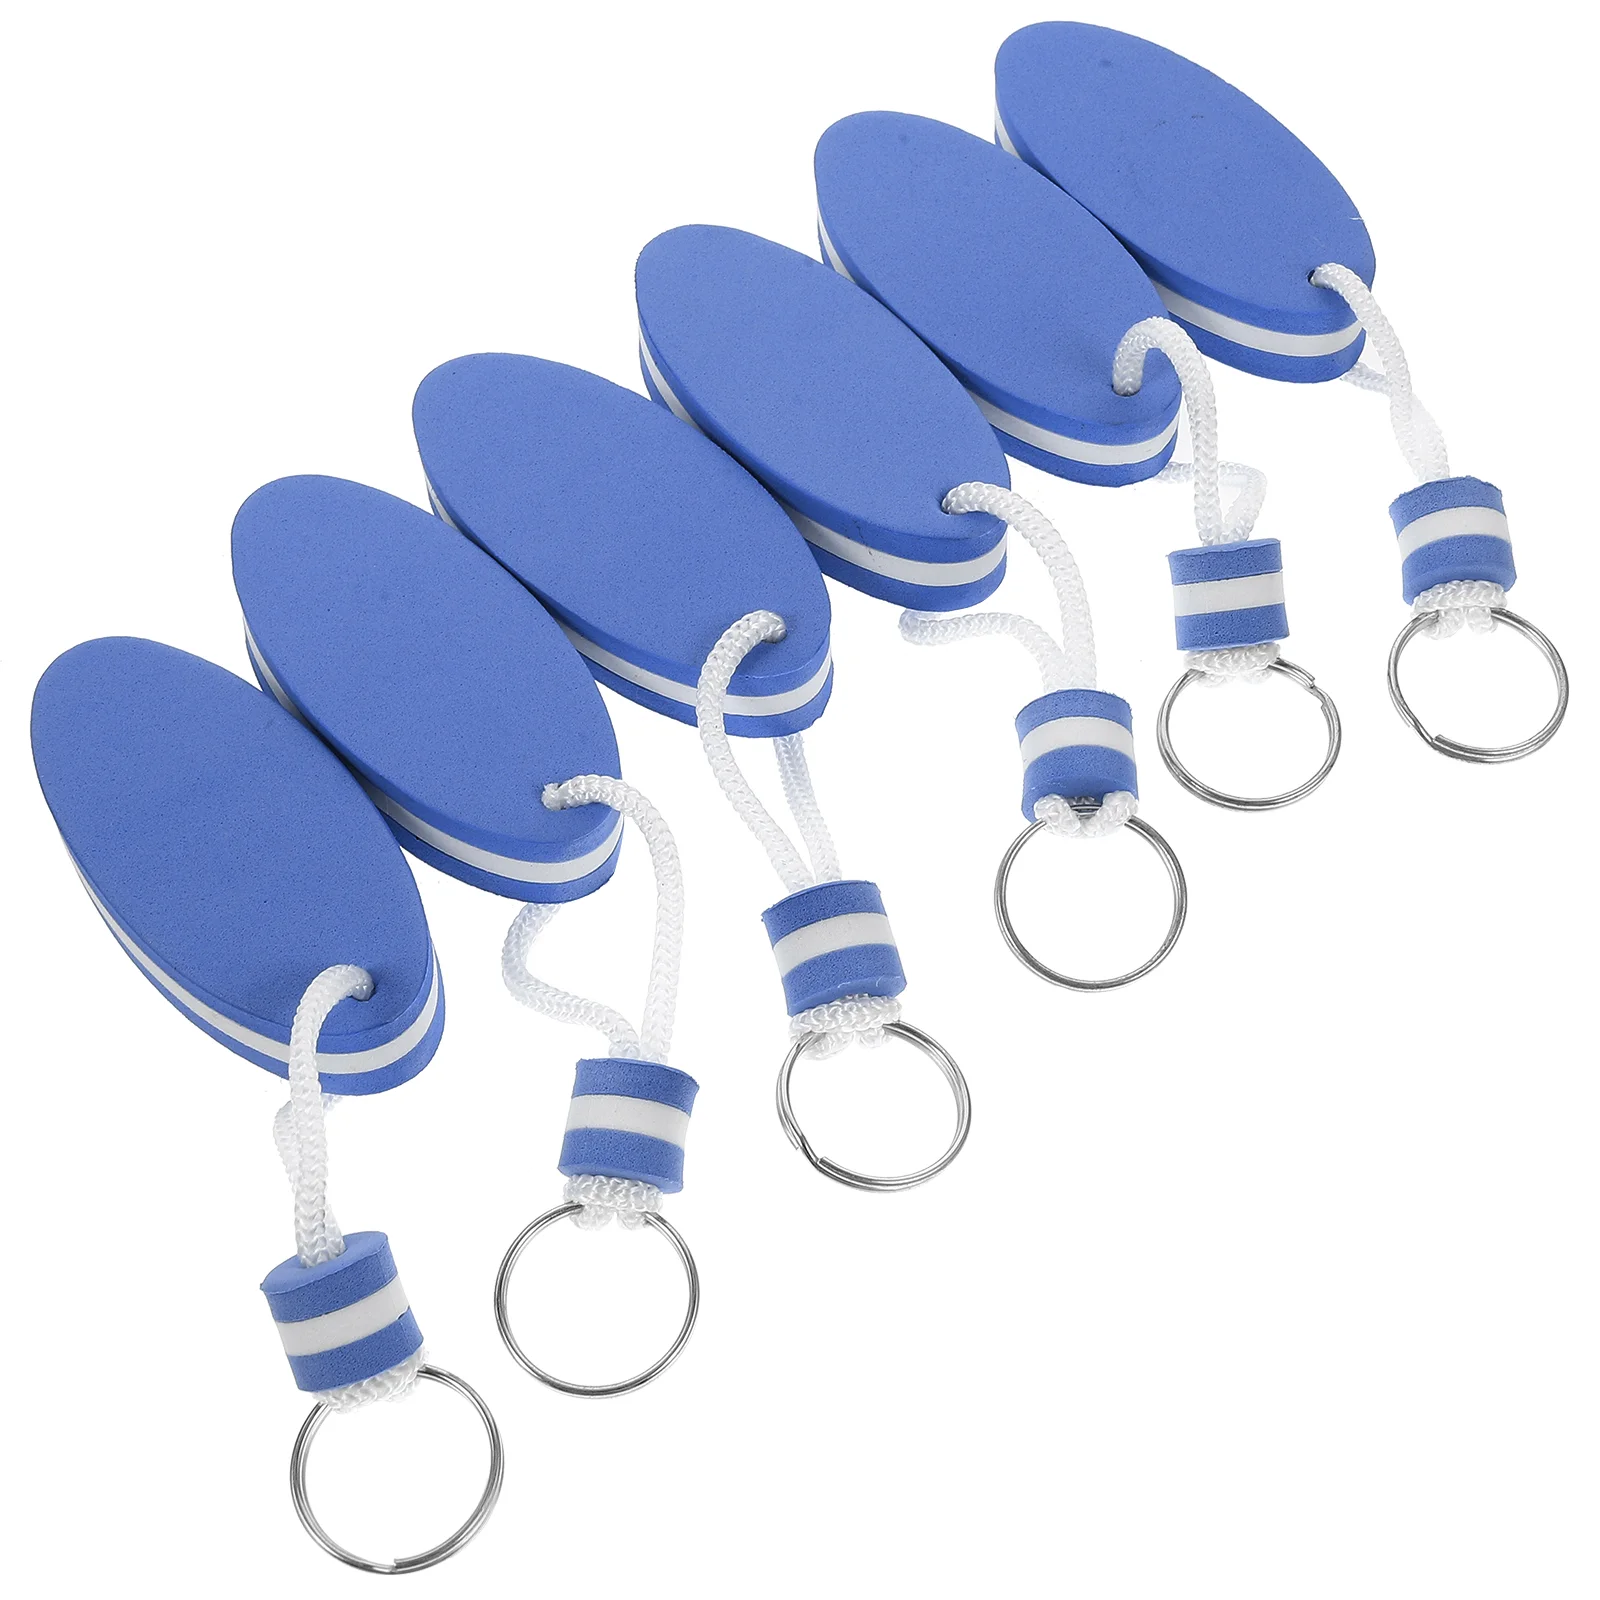 

6 Pcs Floating Keychains Bathroom Decorations Small Water Surfboard Decorate Decorative